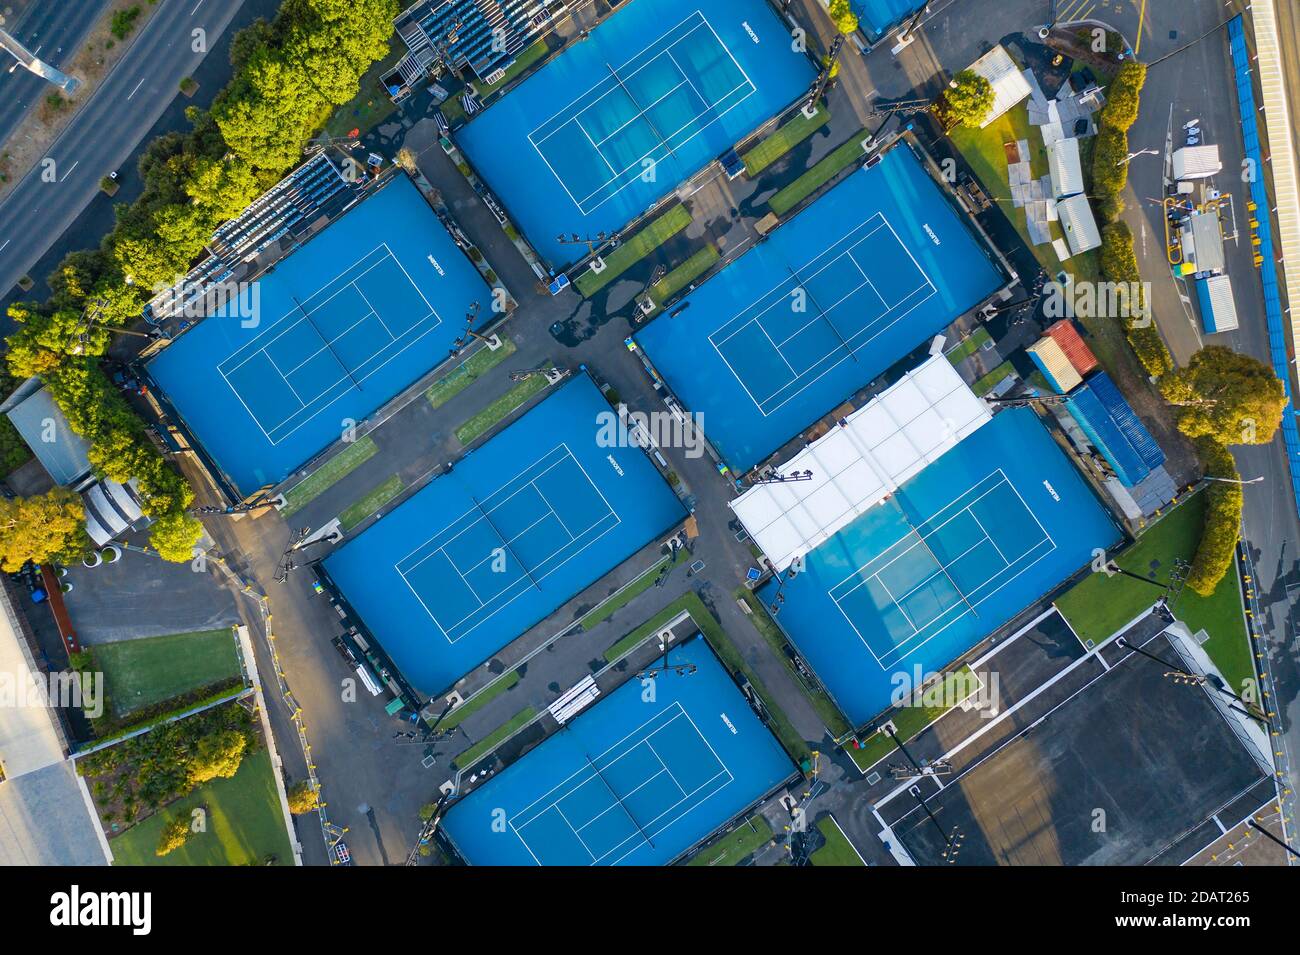 Aerial top down of tennis courts in Park Stock Photo - Alamy